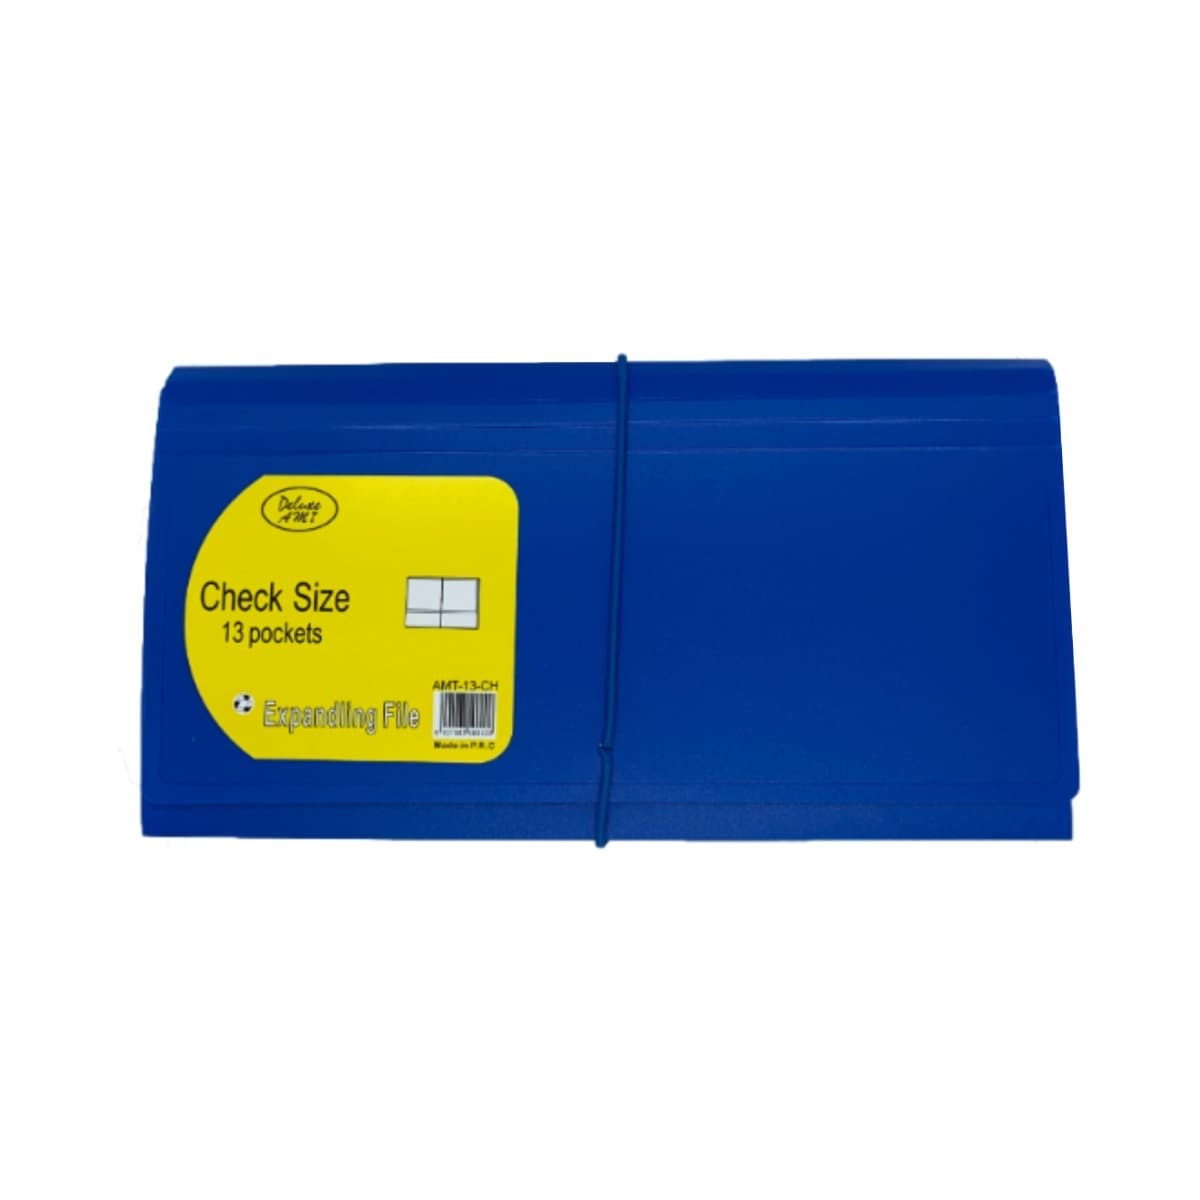 Deluxe Cheque Expanding File with elastic fastener, 13 Pockets, Blue